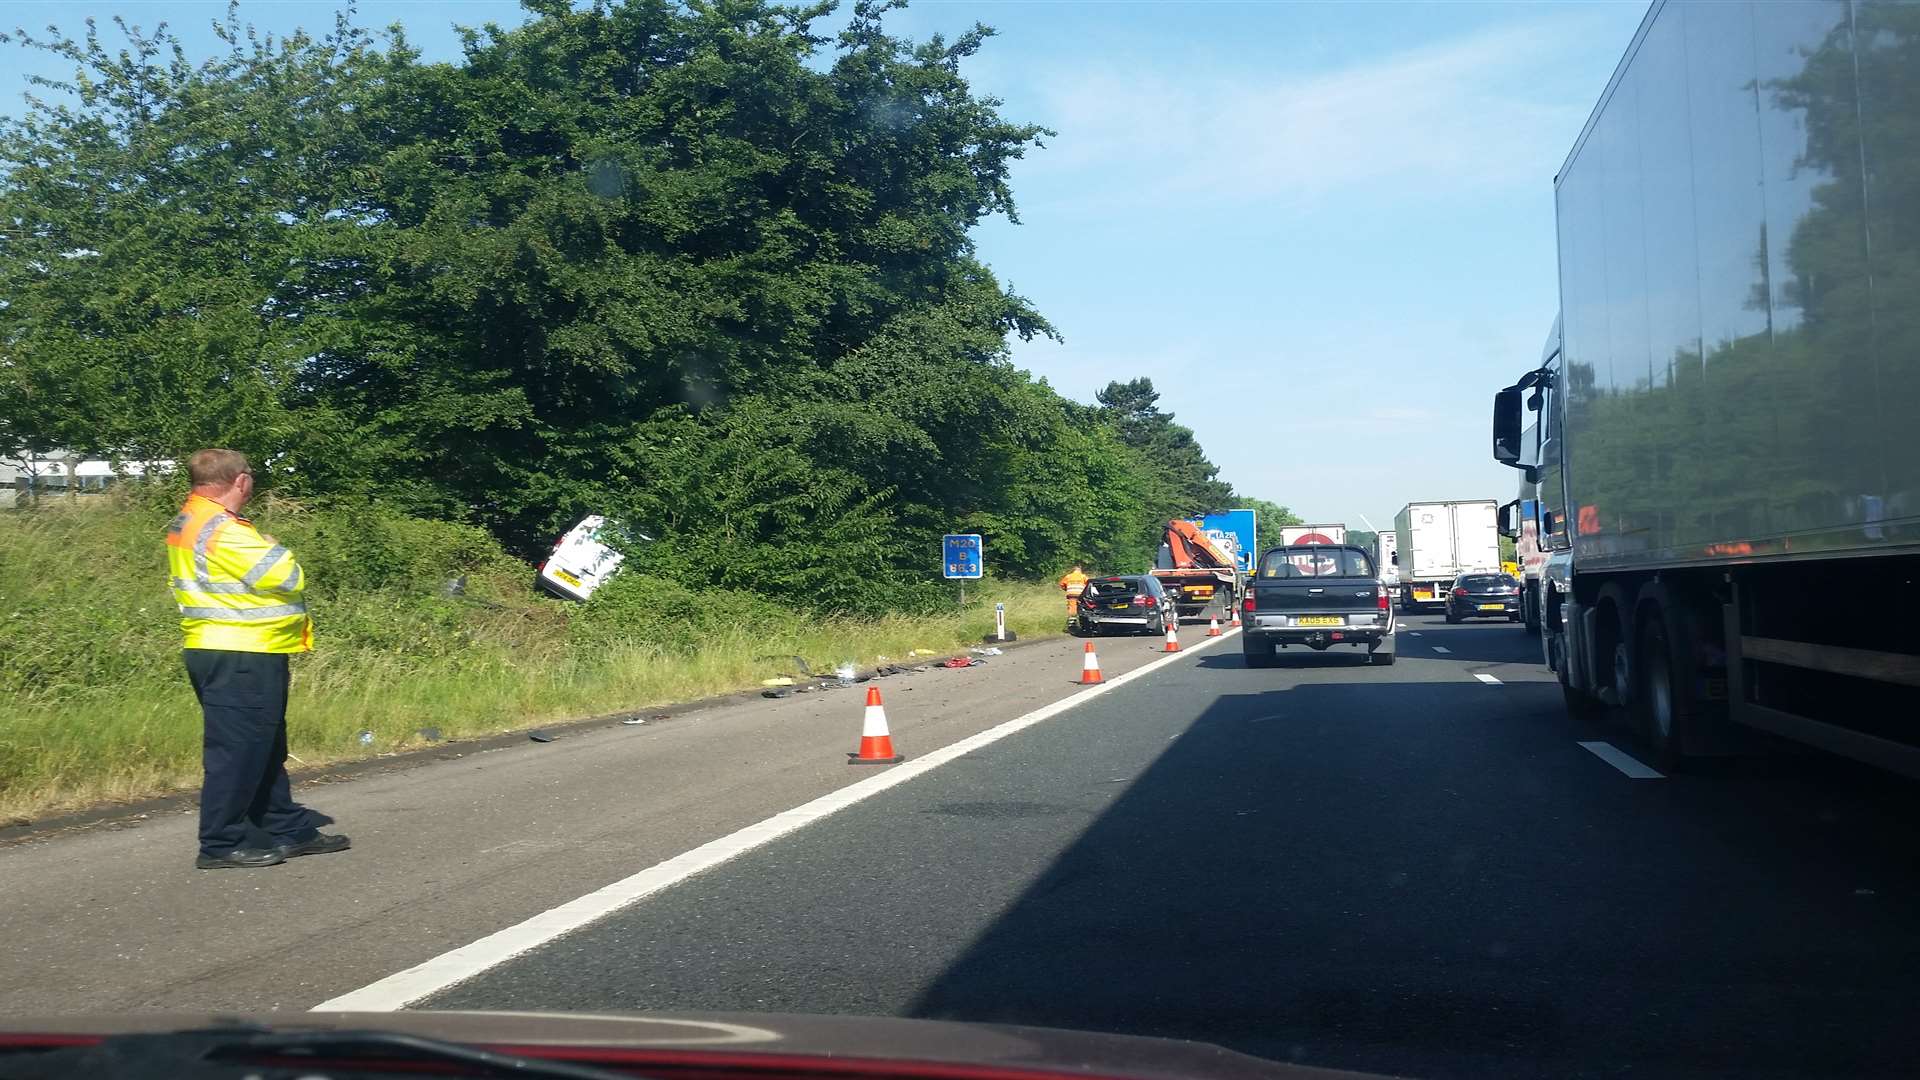 An accident on the M20 added to the traffic chaos